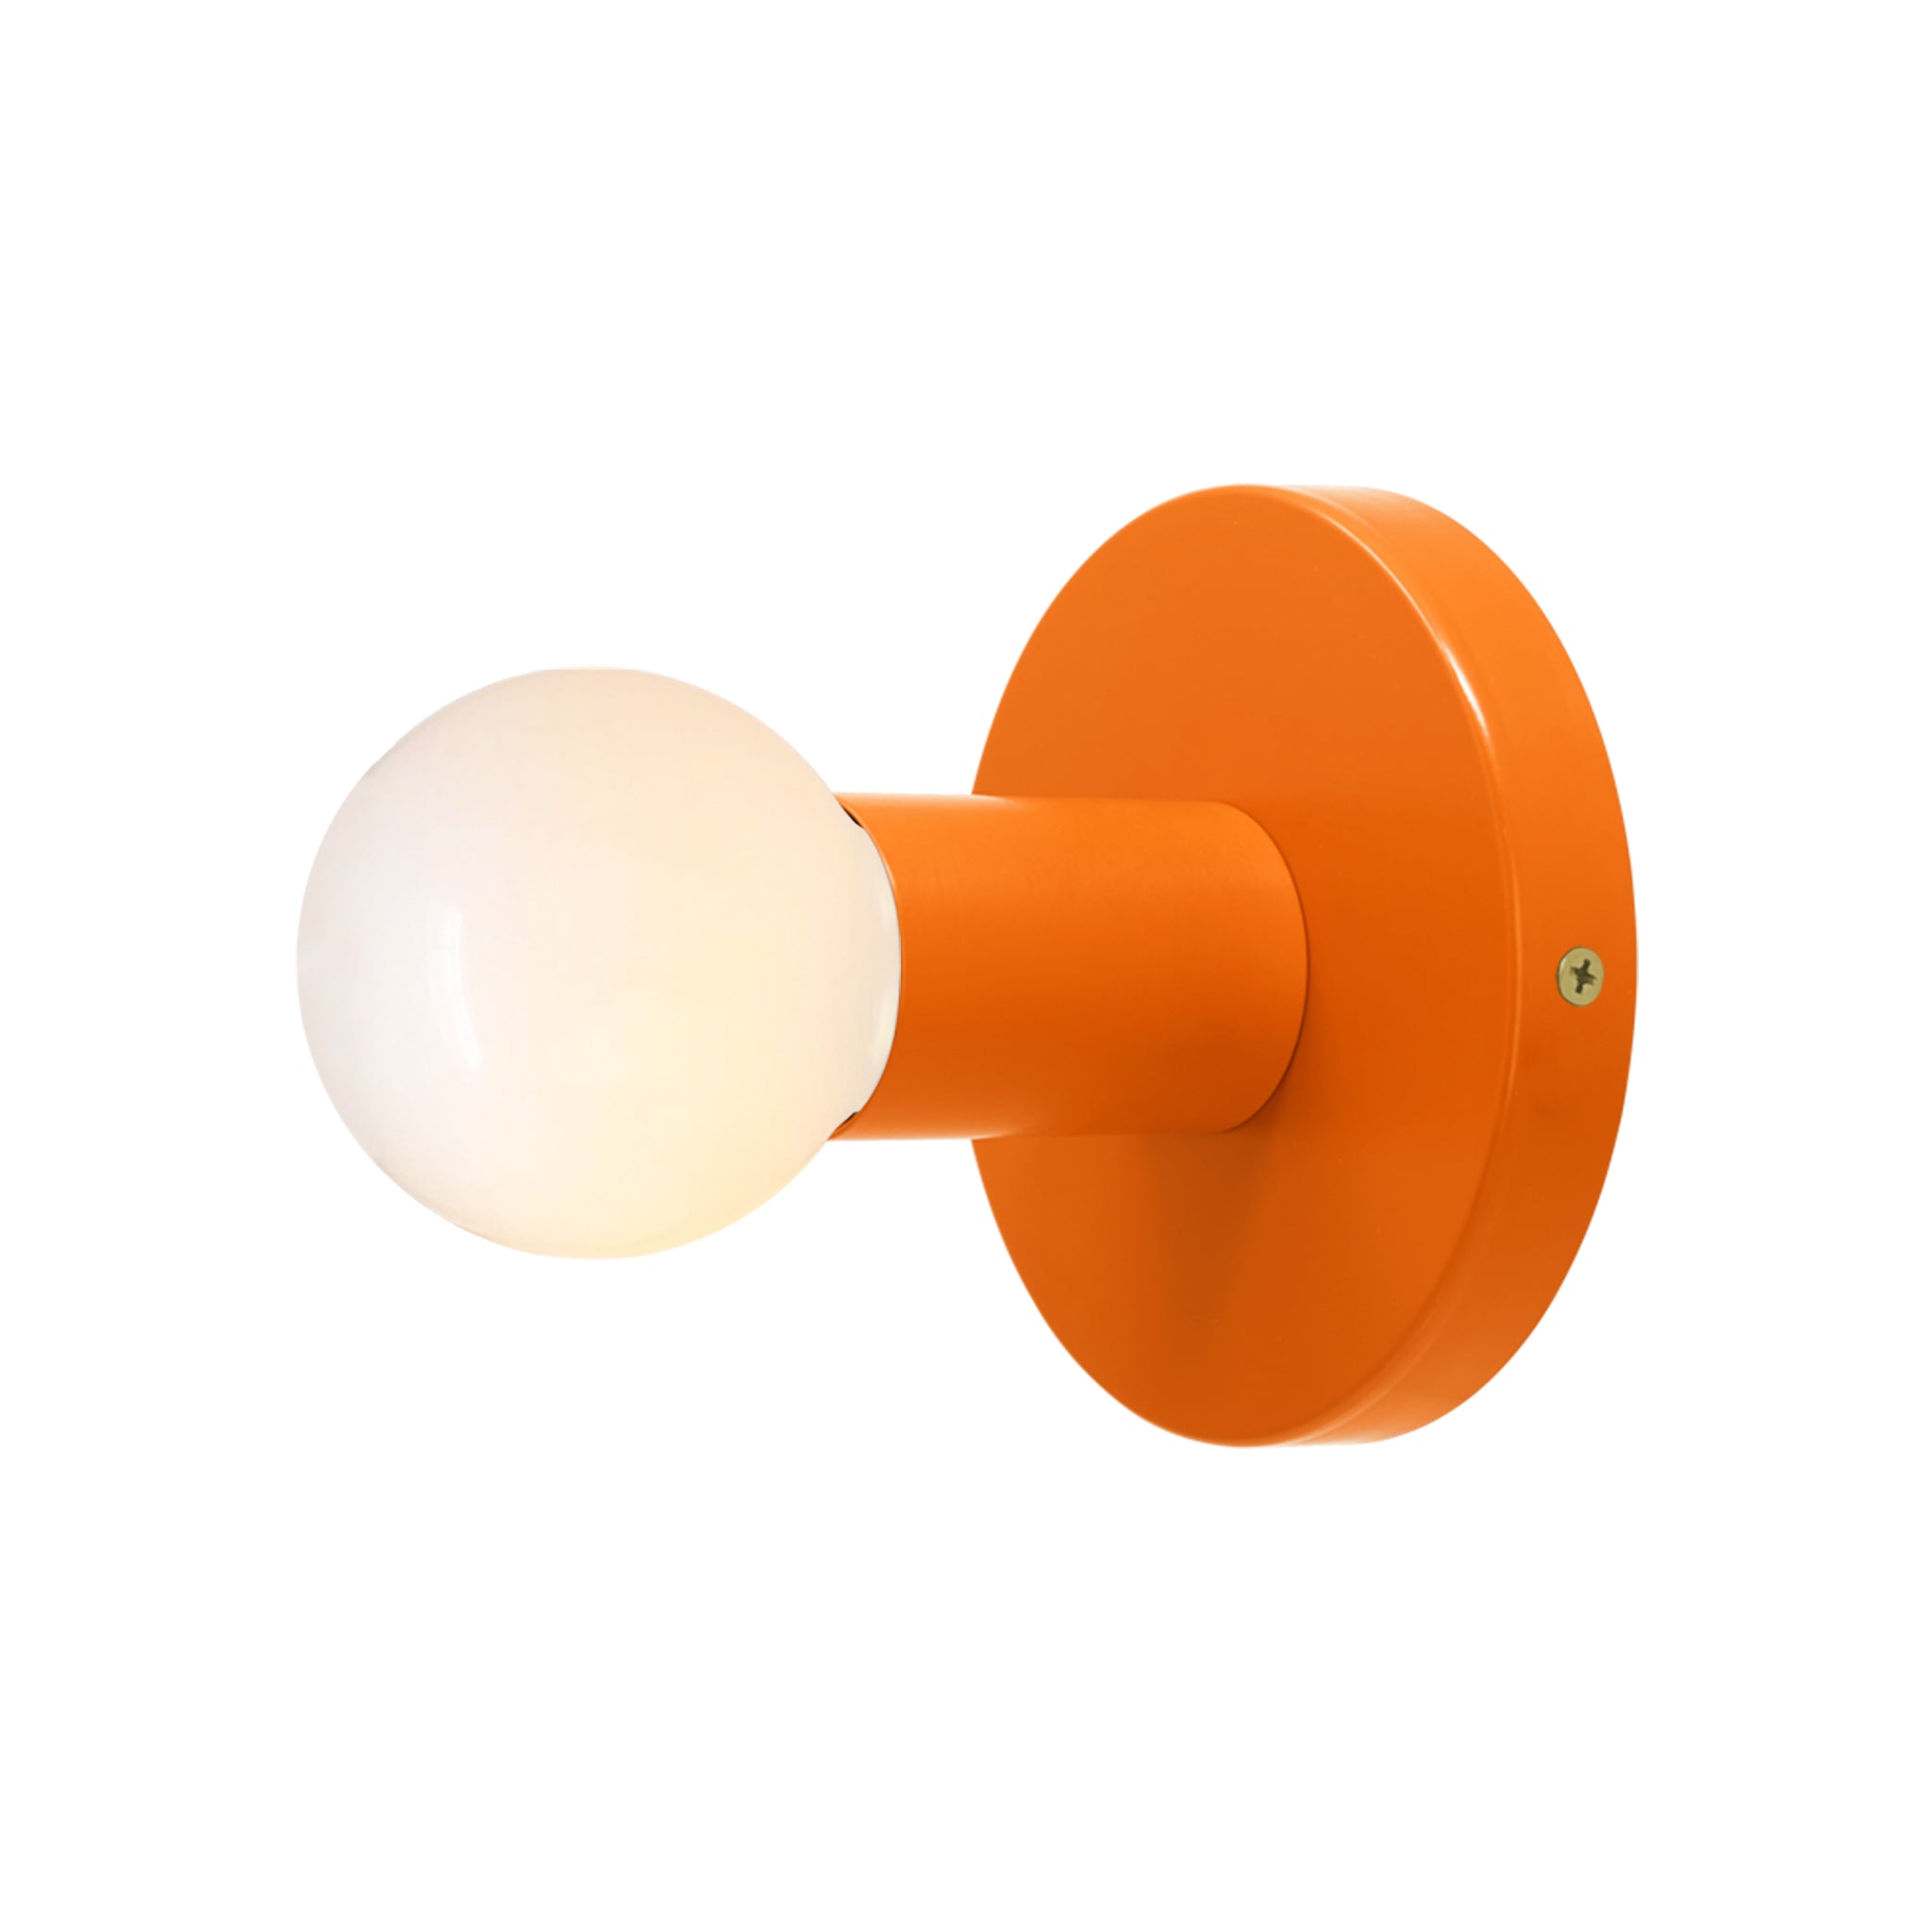 Brass and orange color Twink sconce Dutton Brown lighting